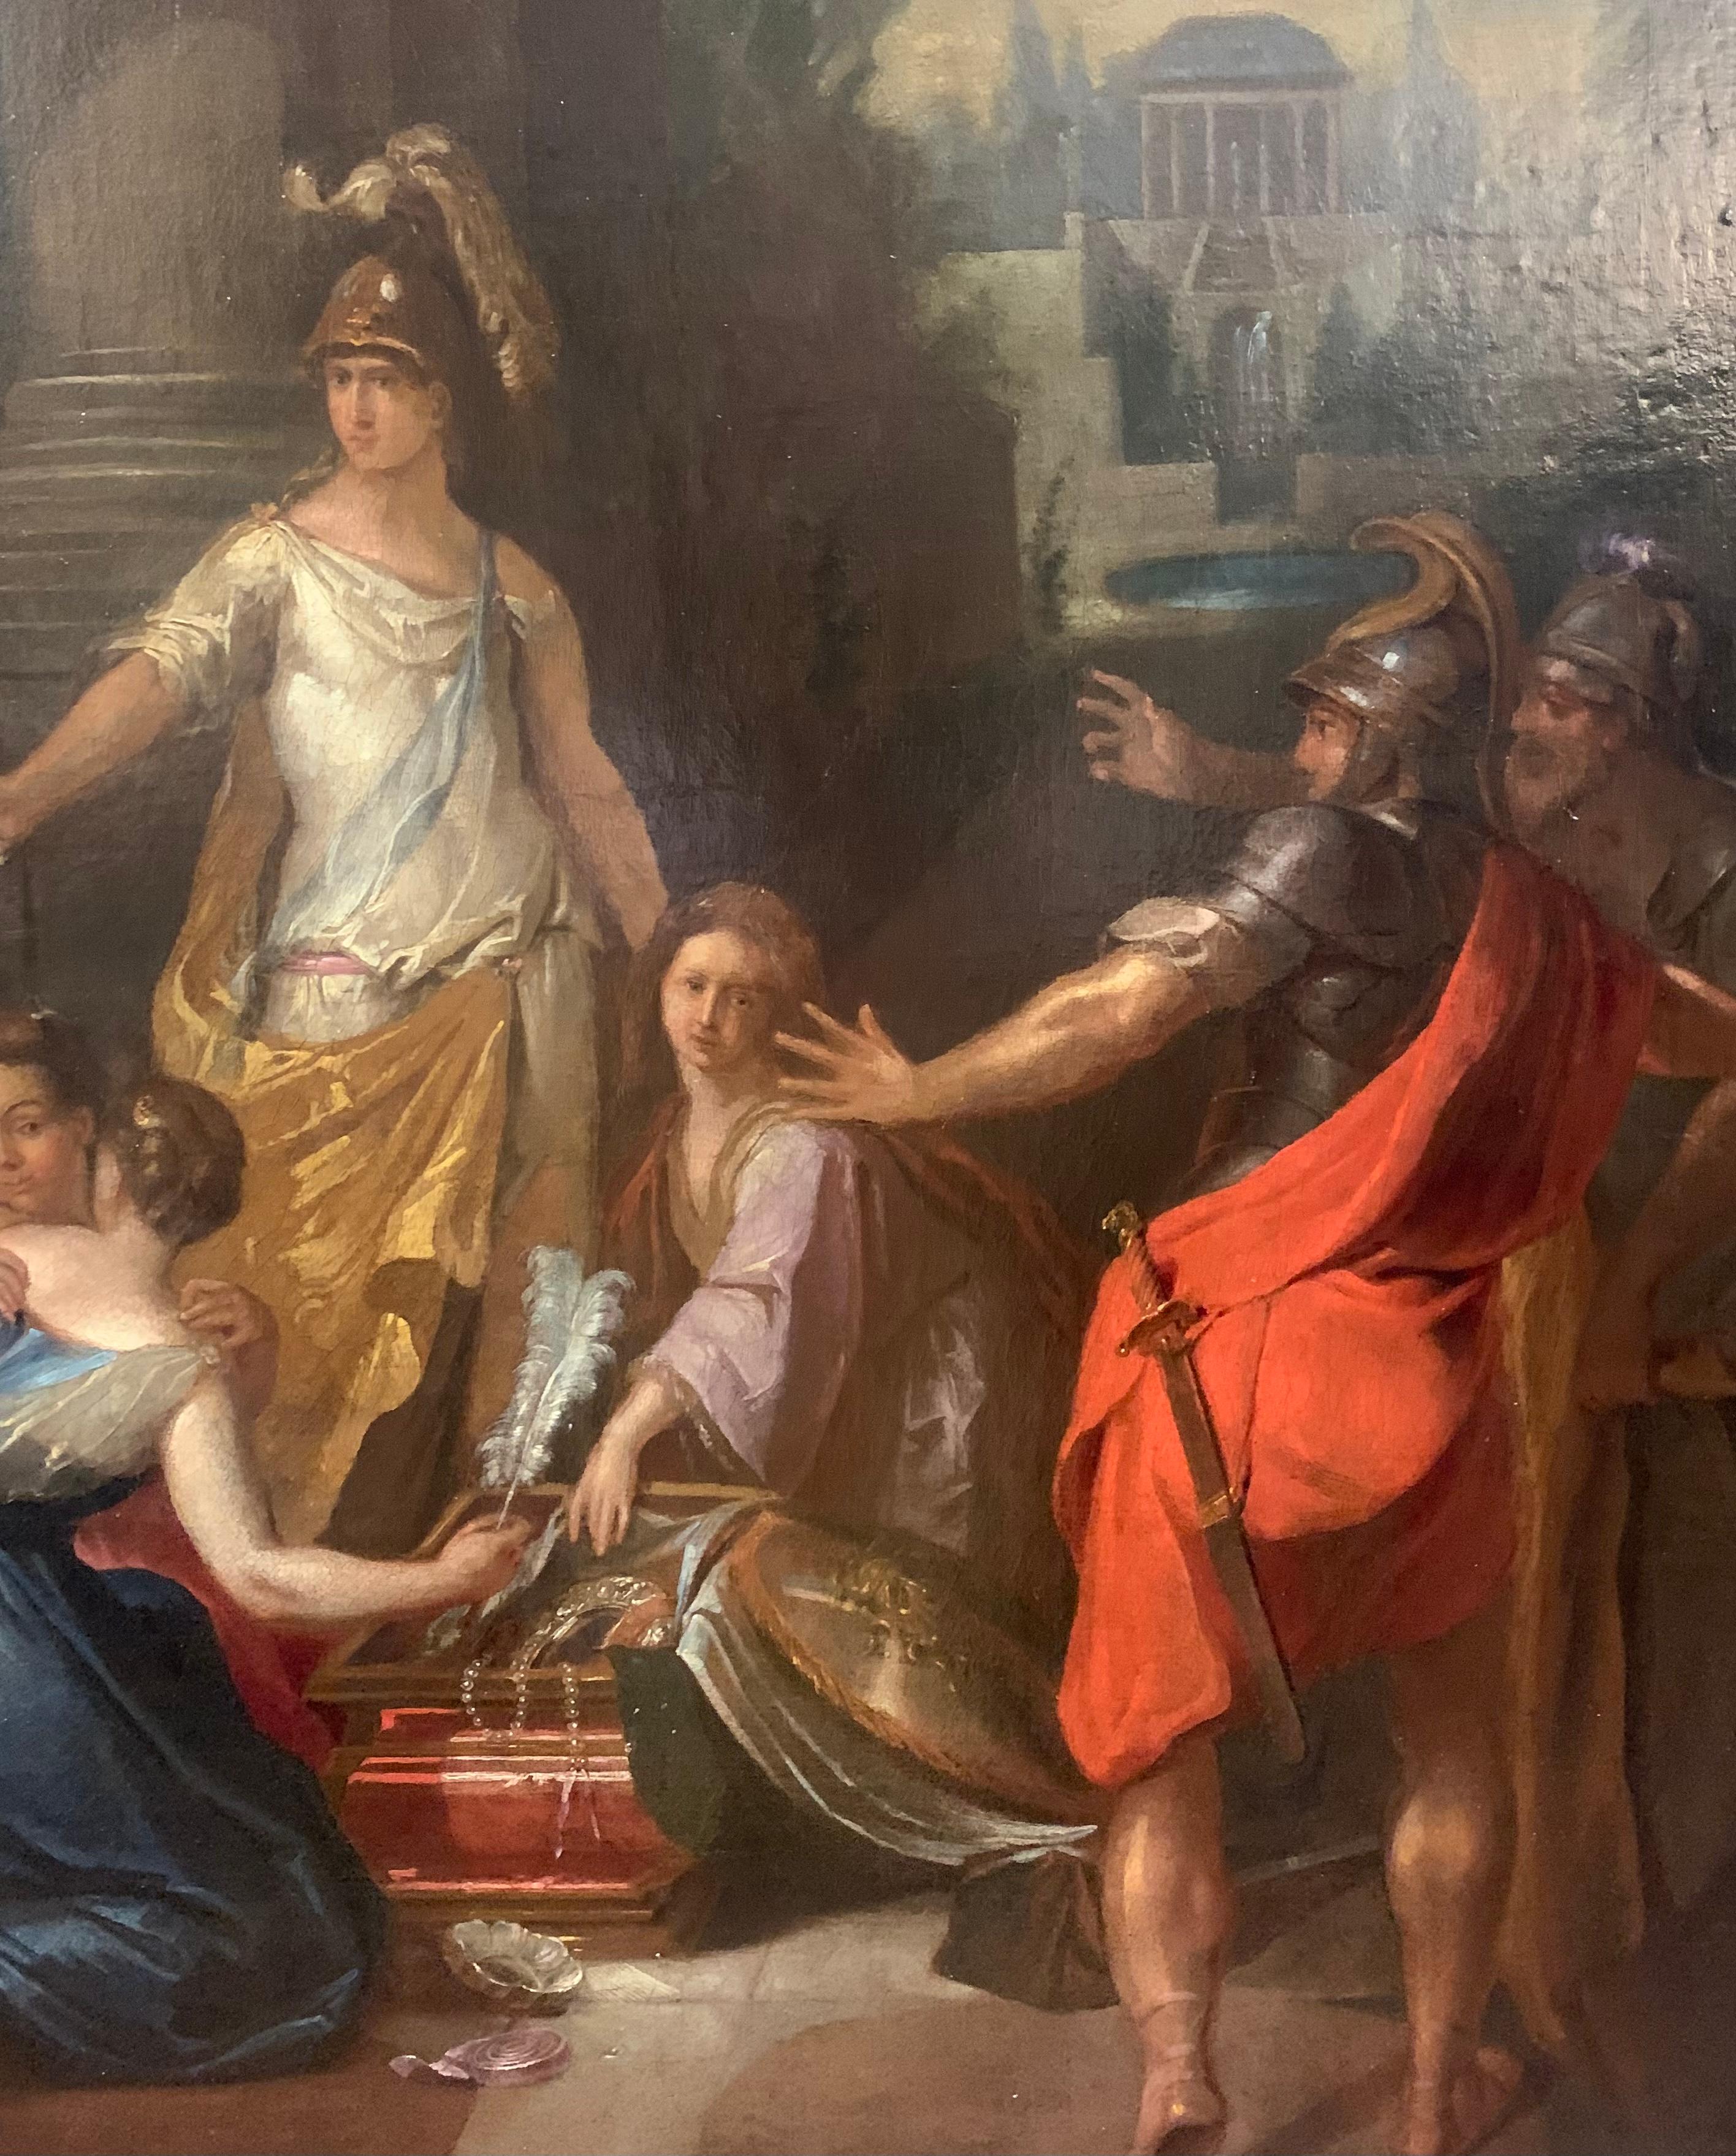 Achilles in the guise of a woman discovered by Ulysses. Dutch school, circa 1720 - Painting by Unknown